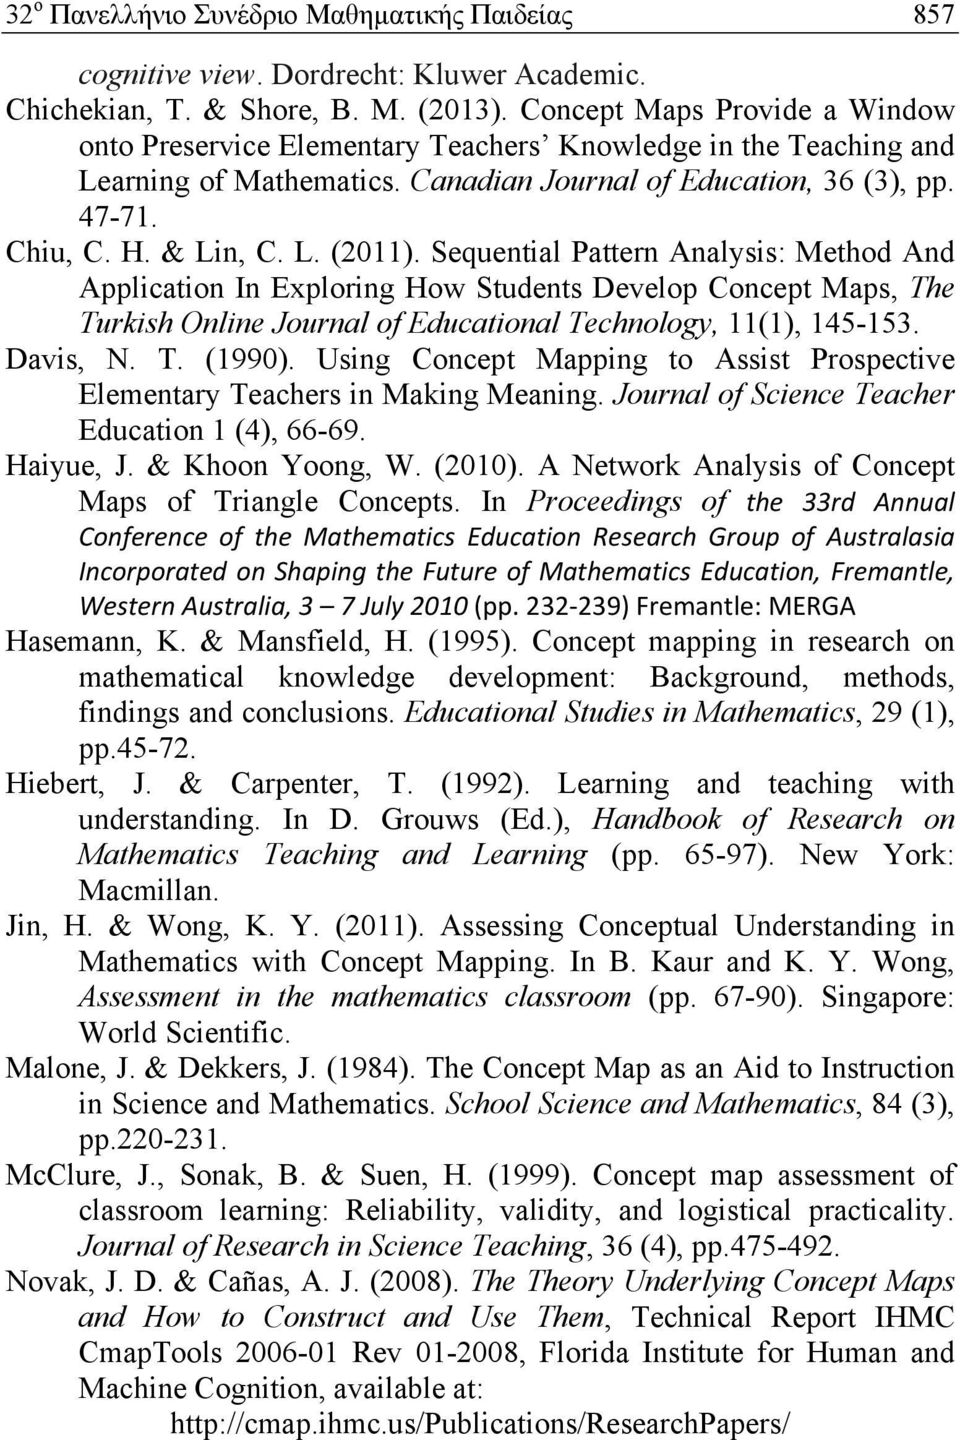 Sequential Pattern Analysis: Method And Application In Exploring How Students Develop Concept Maps, The Turkish Online Journal of Educational Technology, 11(1), 145-153. Davis, N. T. (1990).